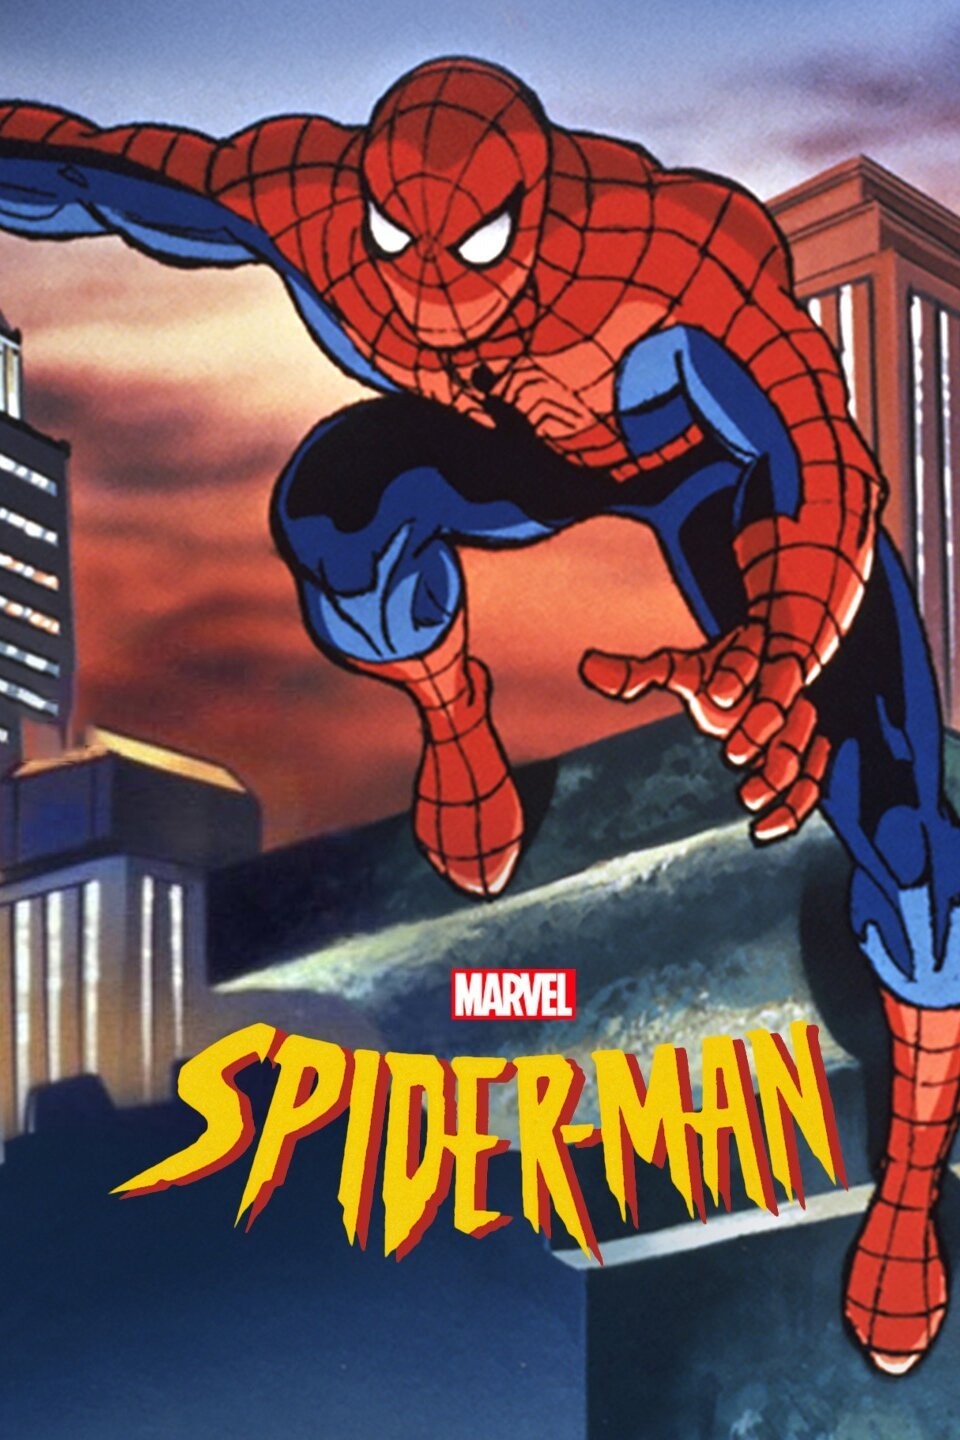 The Spectacular Spider-Man' represents an iconic character